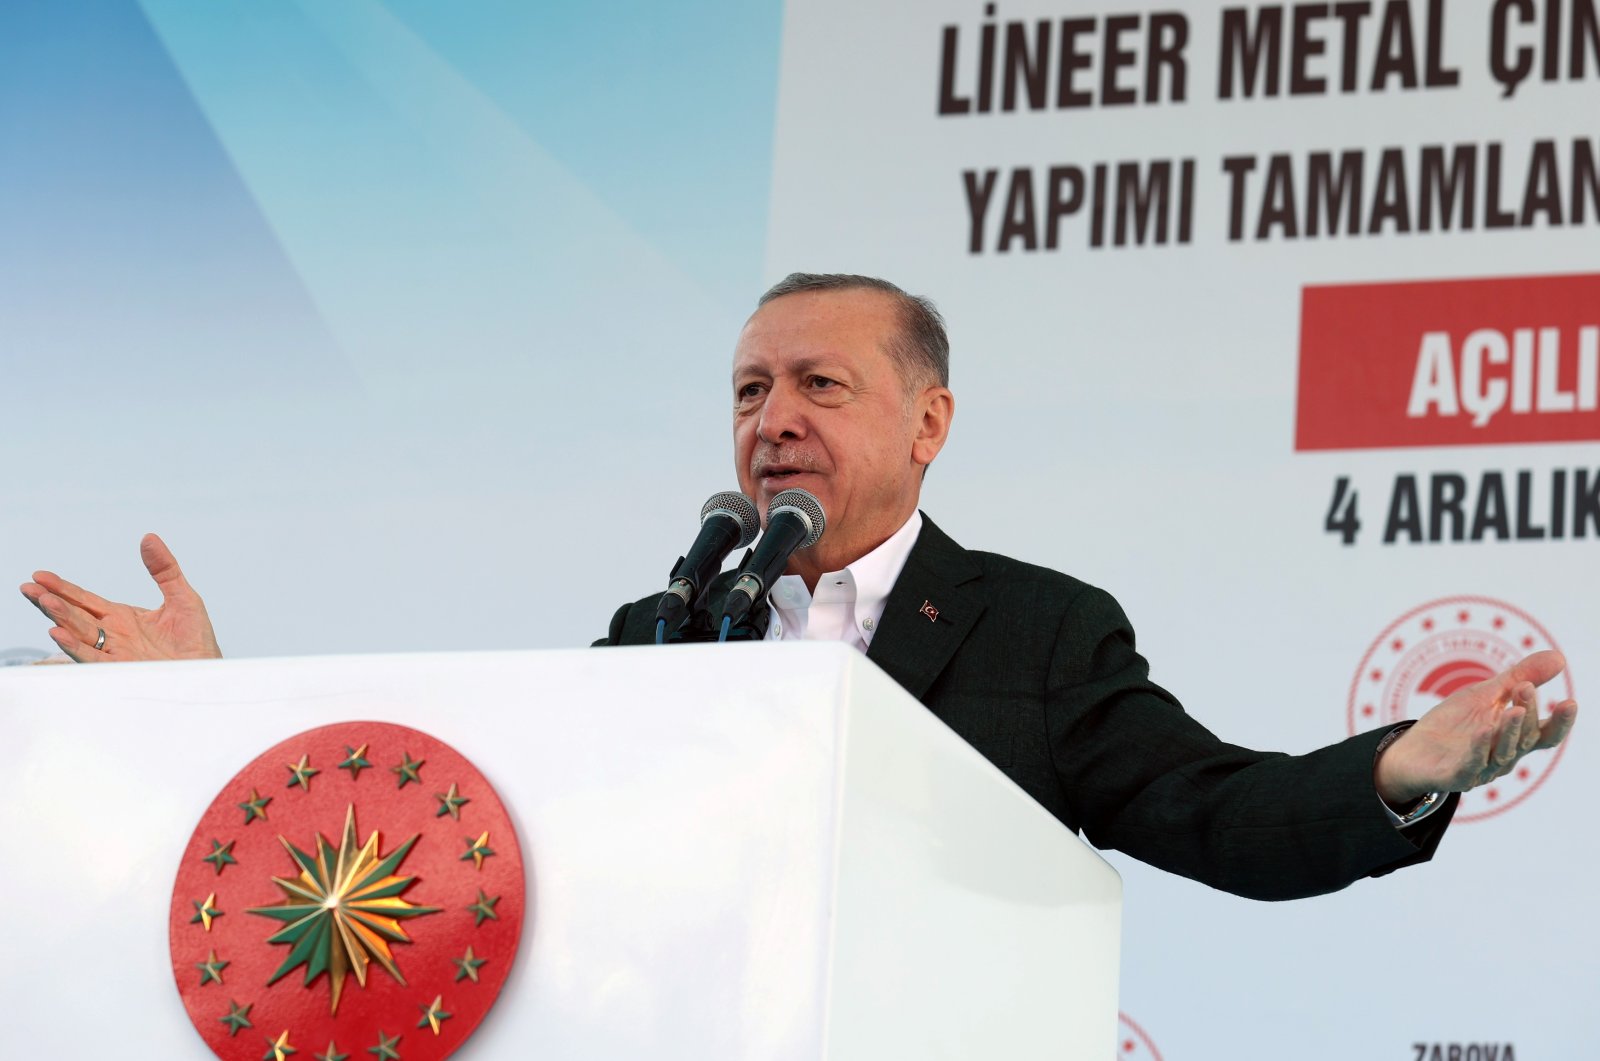 President Recep Tayyip Erdoğan addresses supporters during a ceremony in the southeastern city of Siirt, Turkey, Dec. 4, 2021. (Reuters Photo)